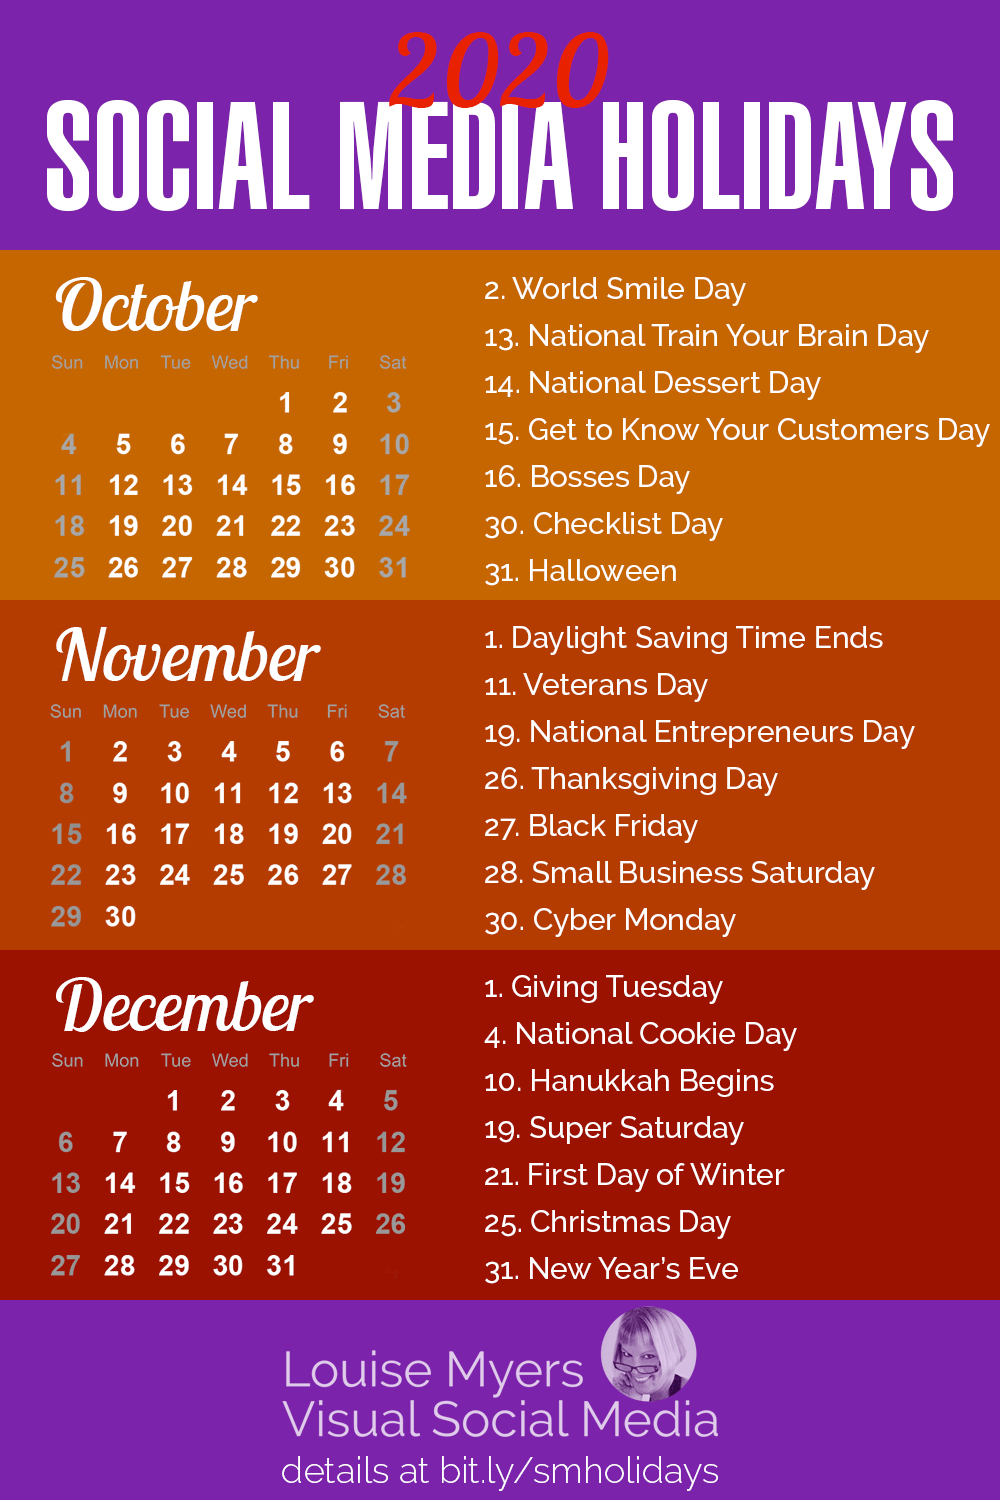 84 Social Media Holidays You Need In 2020: Indispensable!